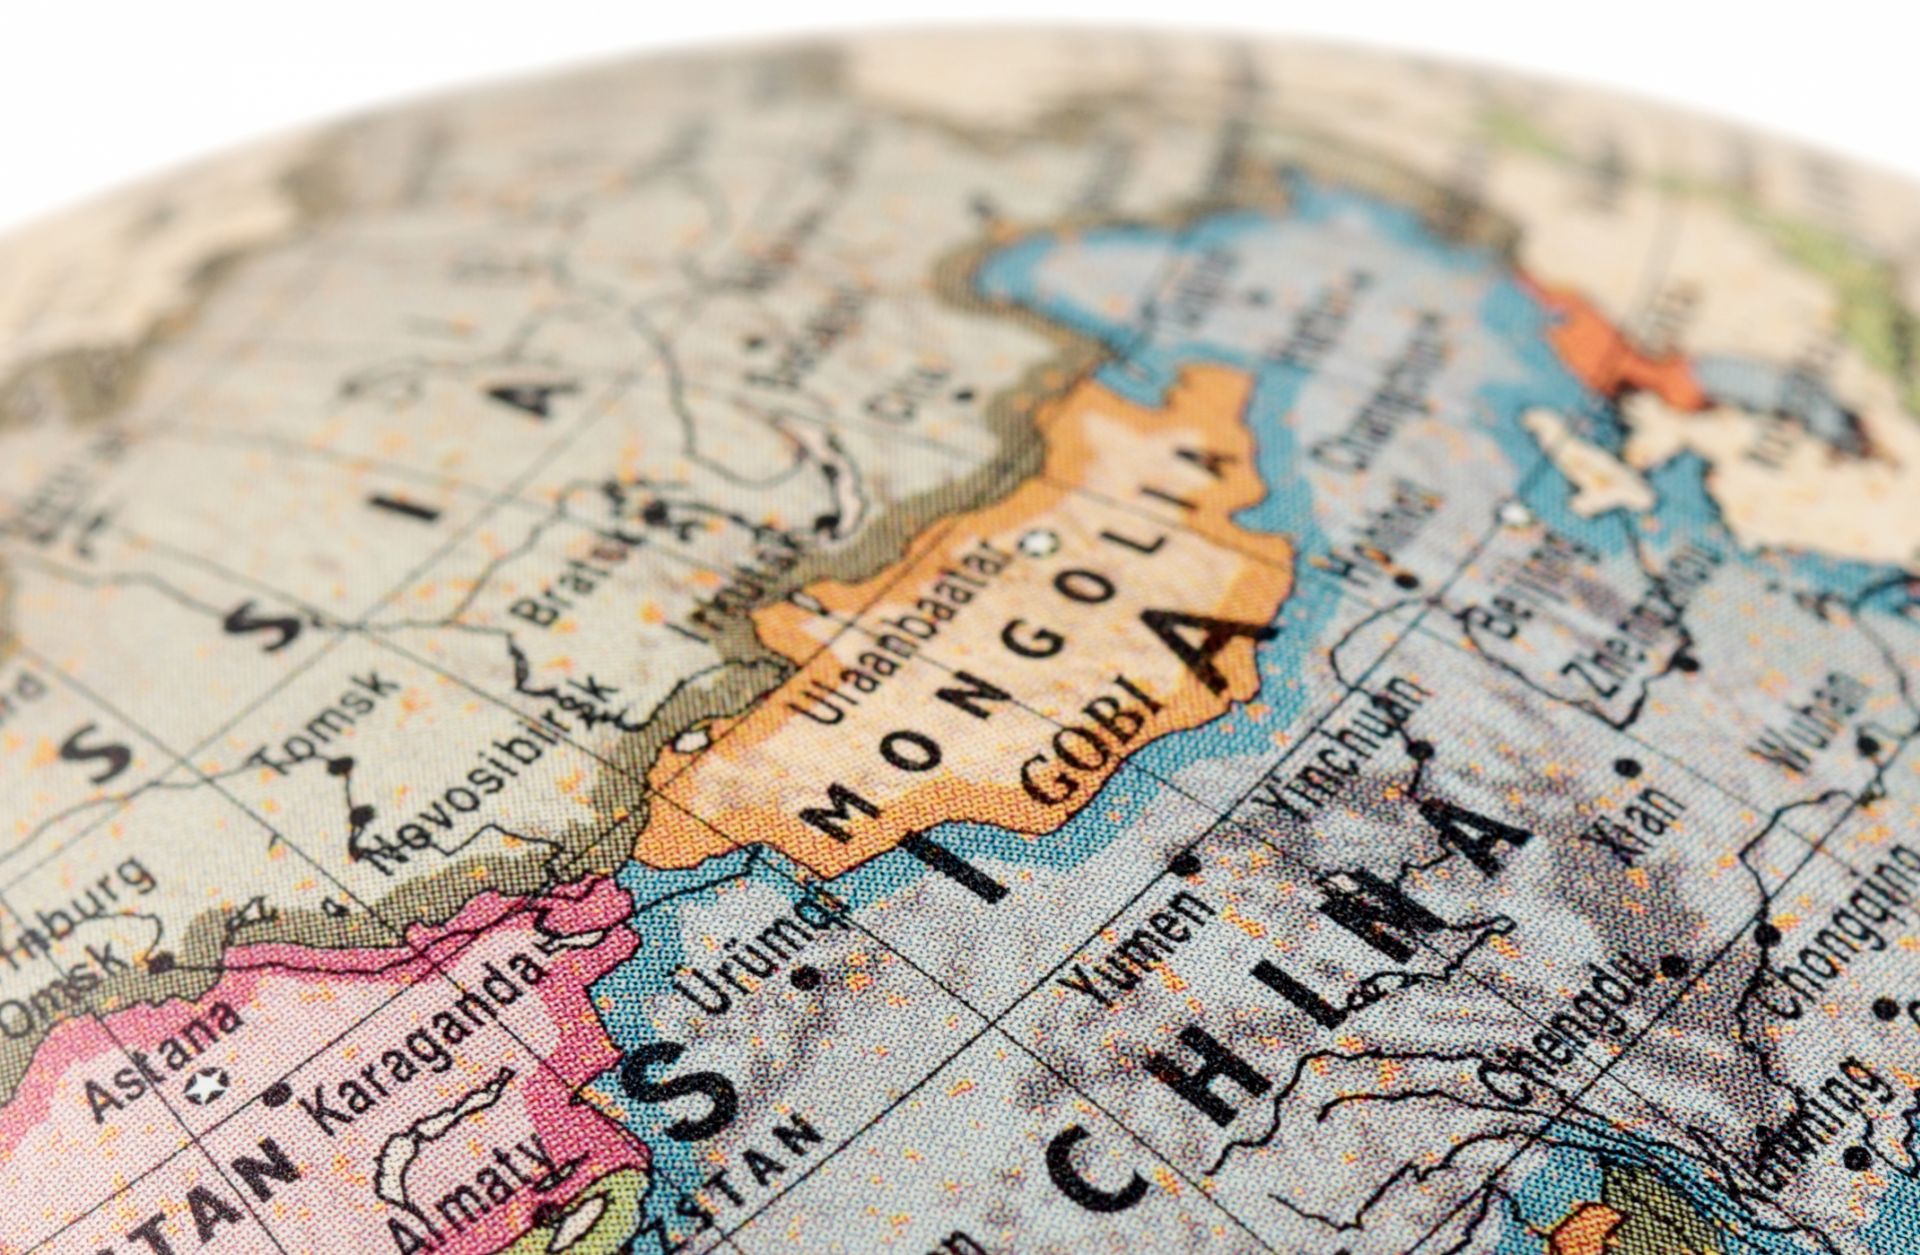 Mongolia is seen on a stock photo of a map.